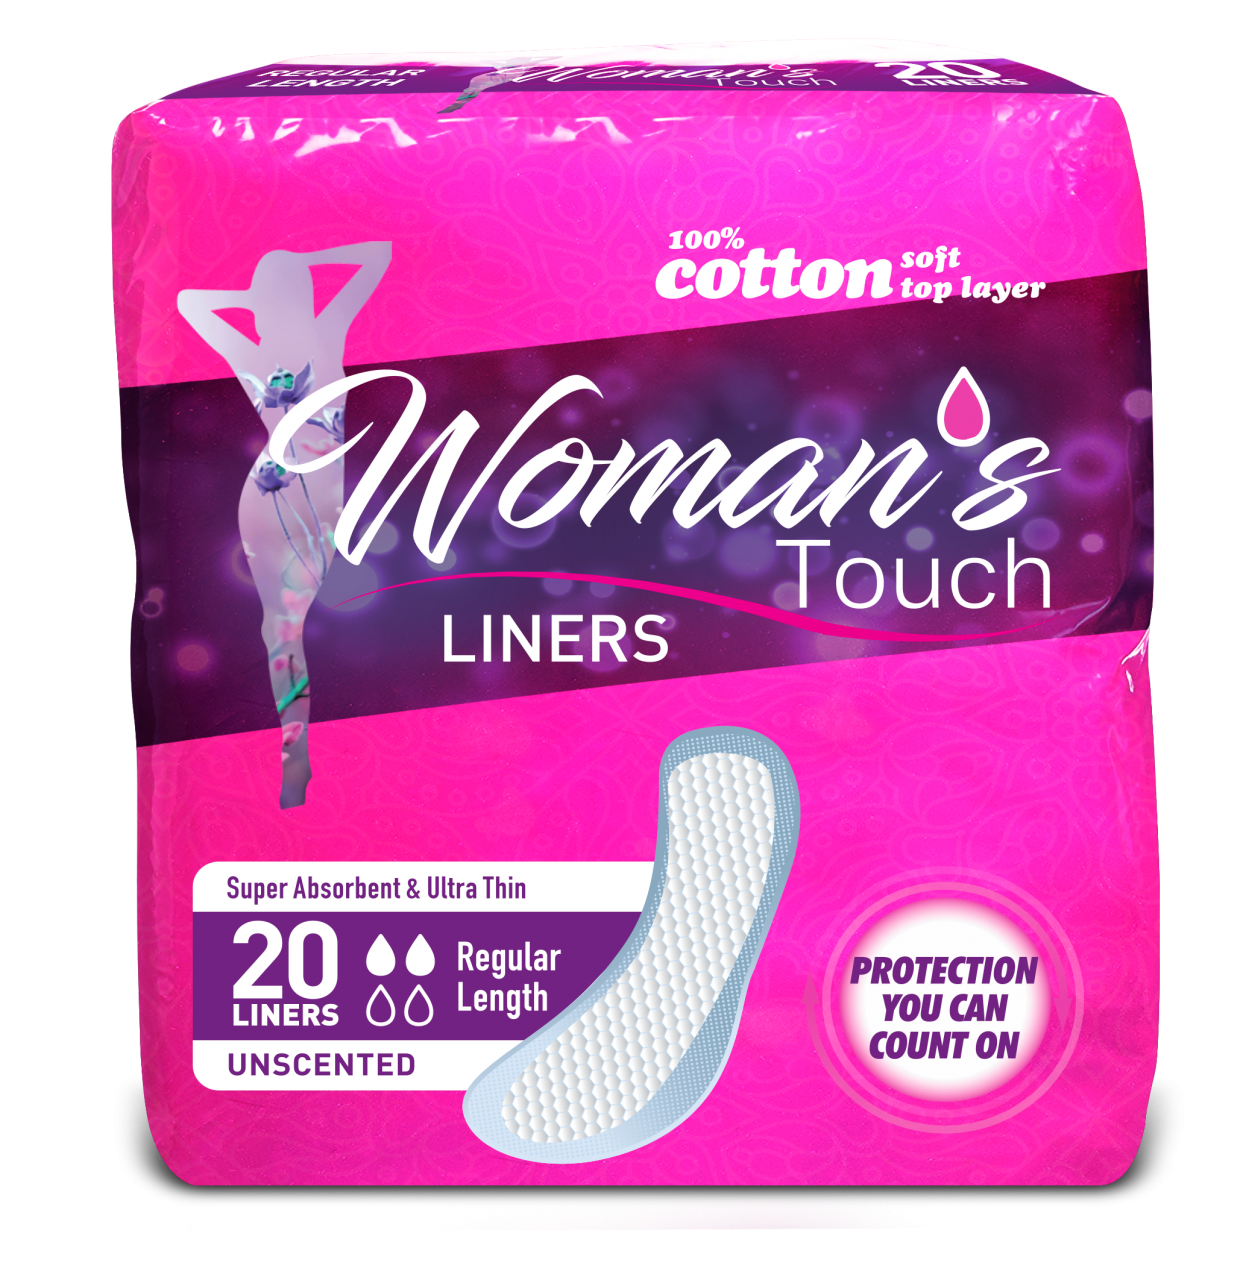 Woman's Touch Super Absorbent Ultra Thin Pads , Liners